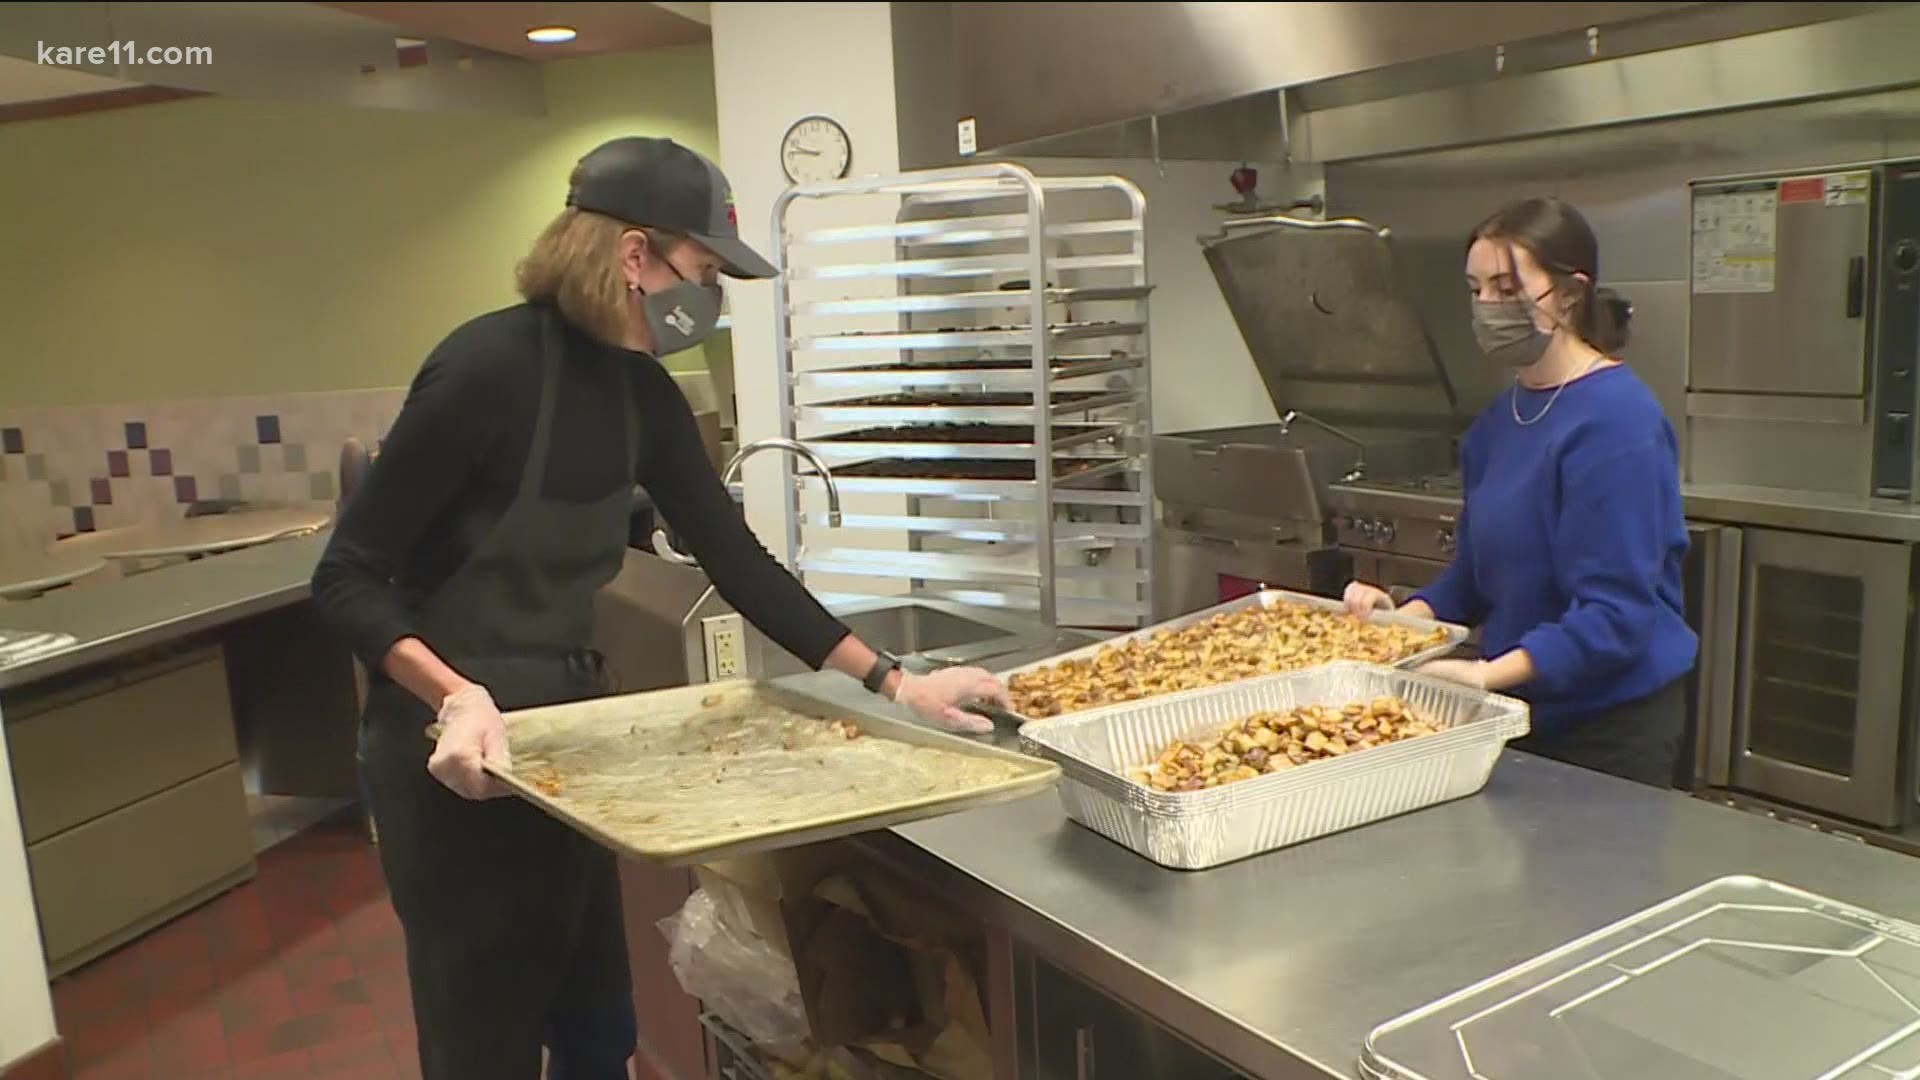 Dozens of volunteers help those who may be isolated this holiday season due to COVID-19.